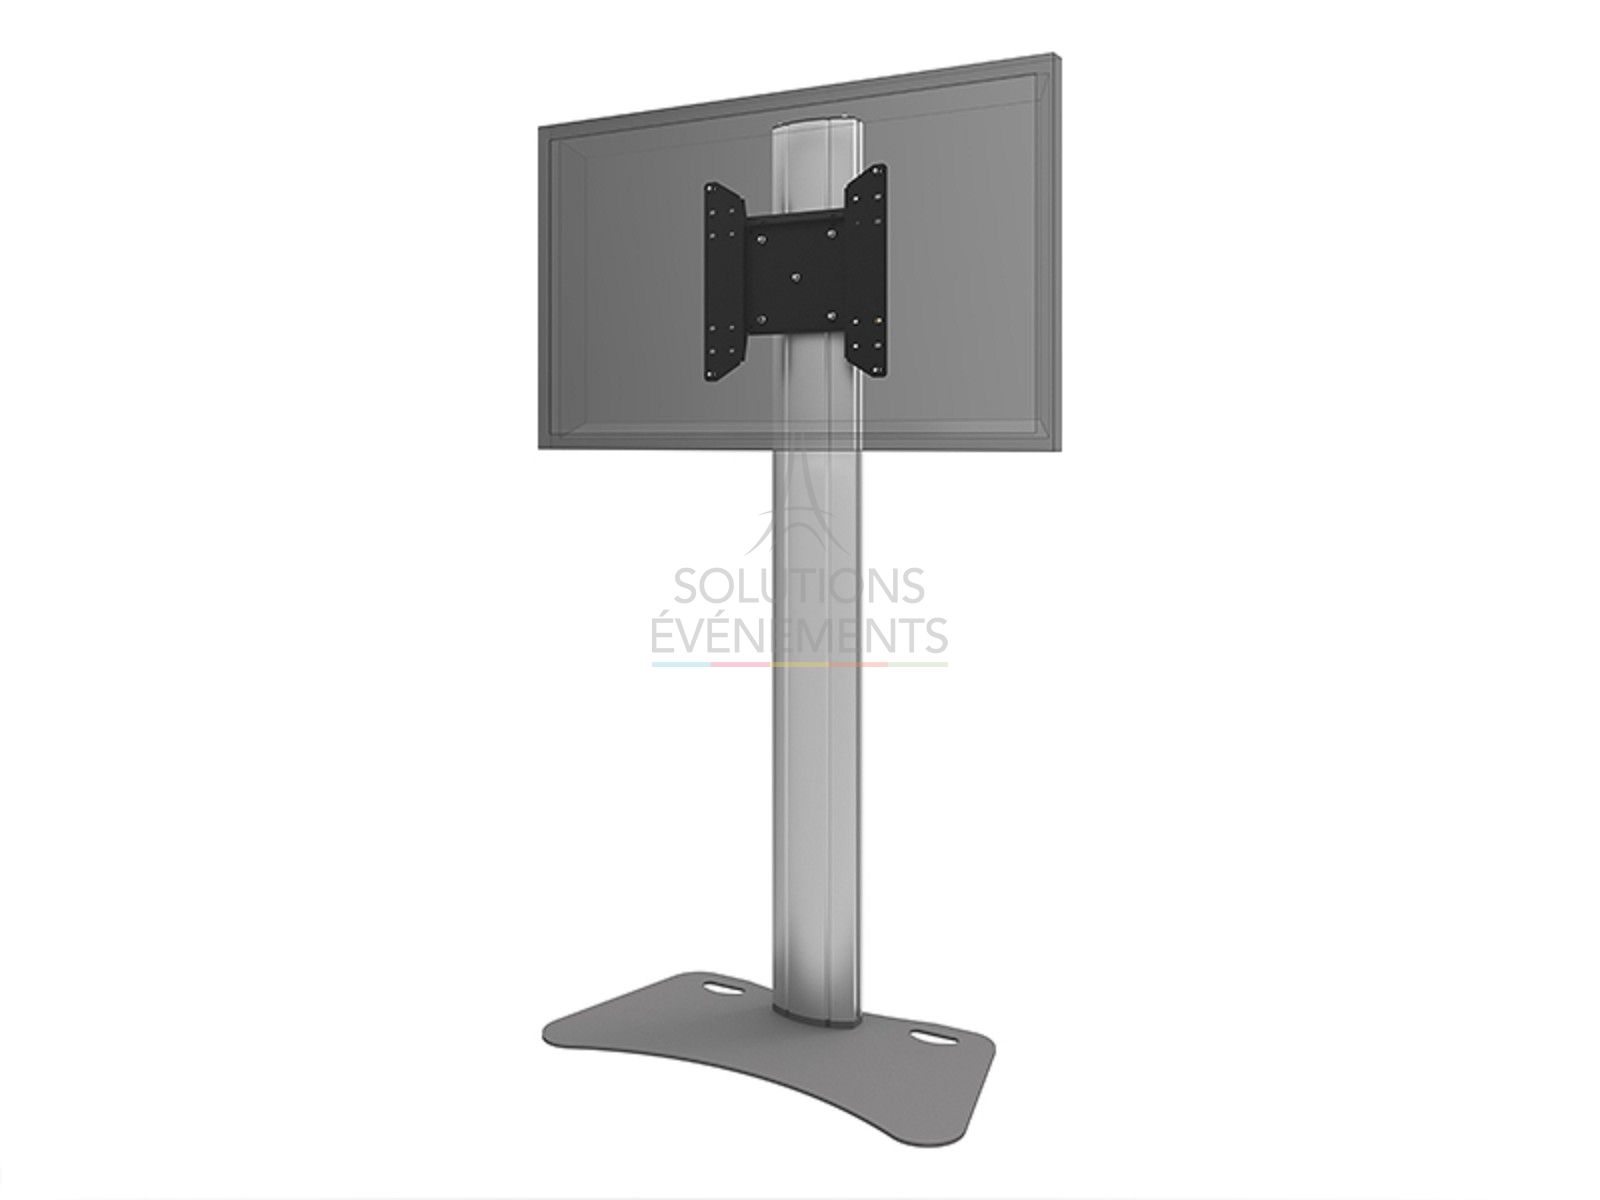 Smart Metal brand self-supporting stand rental